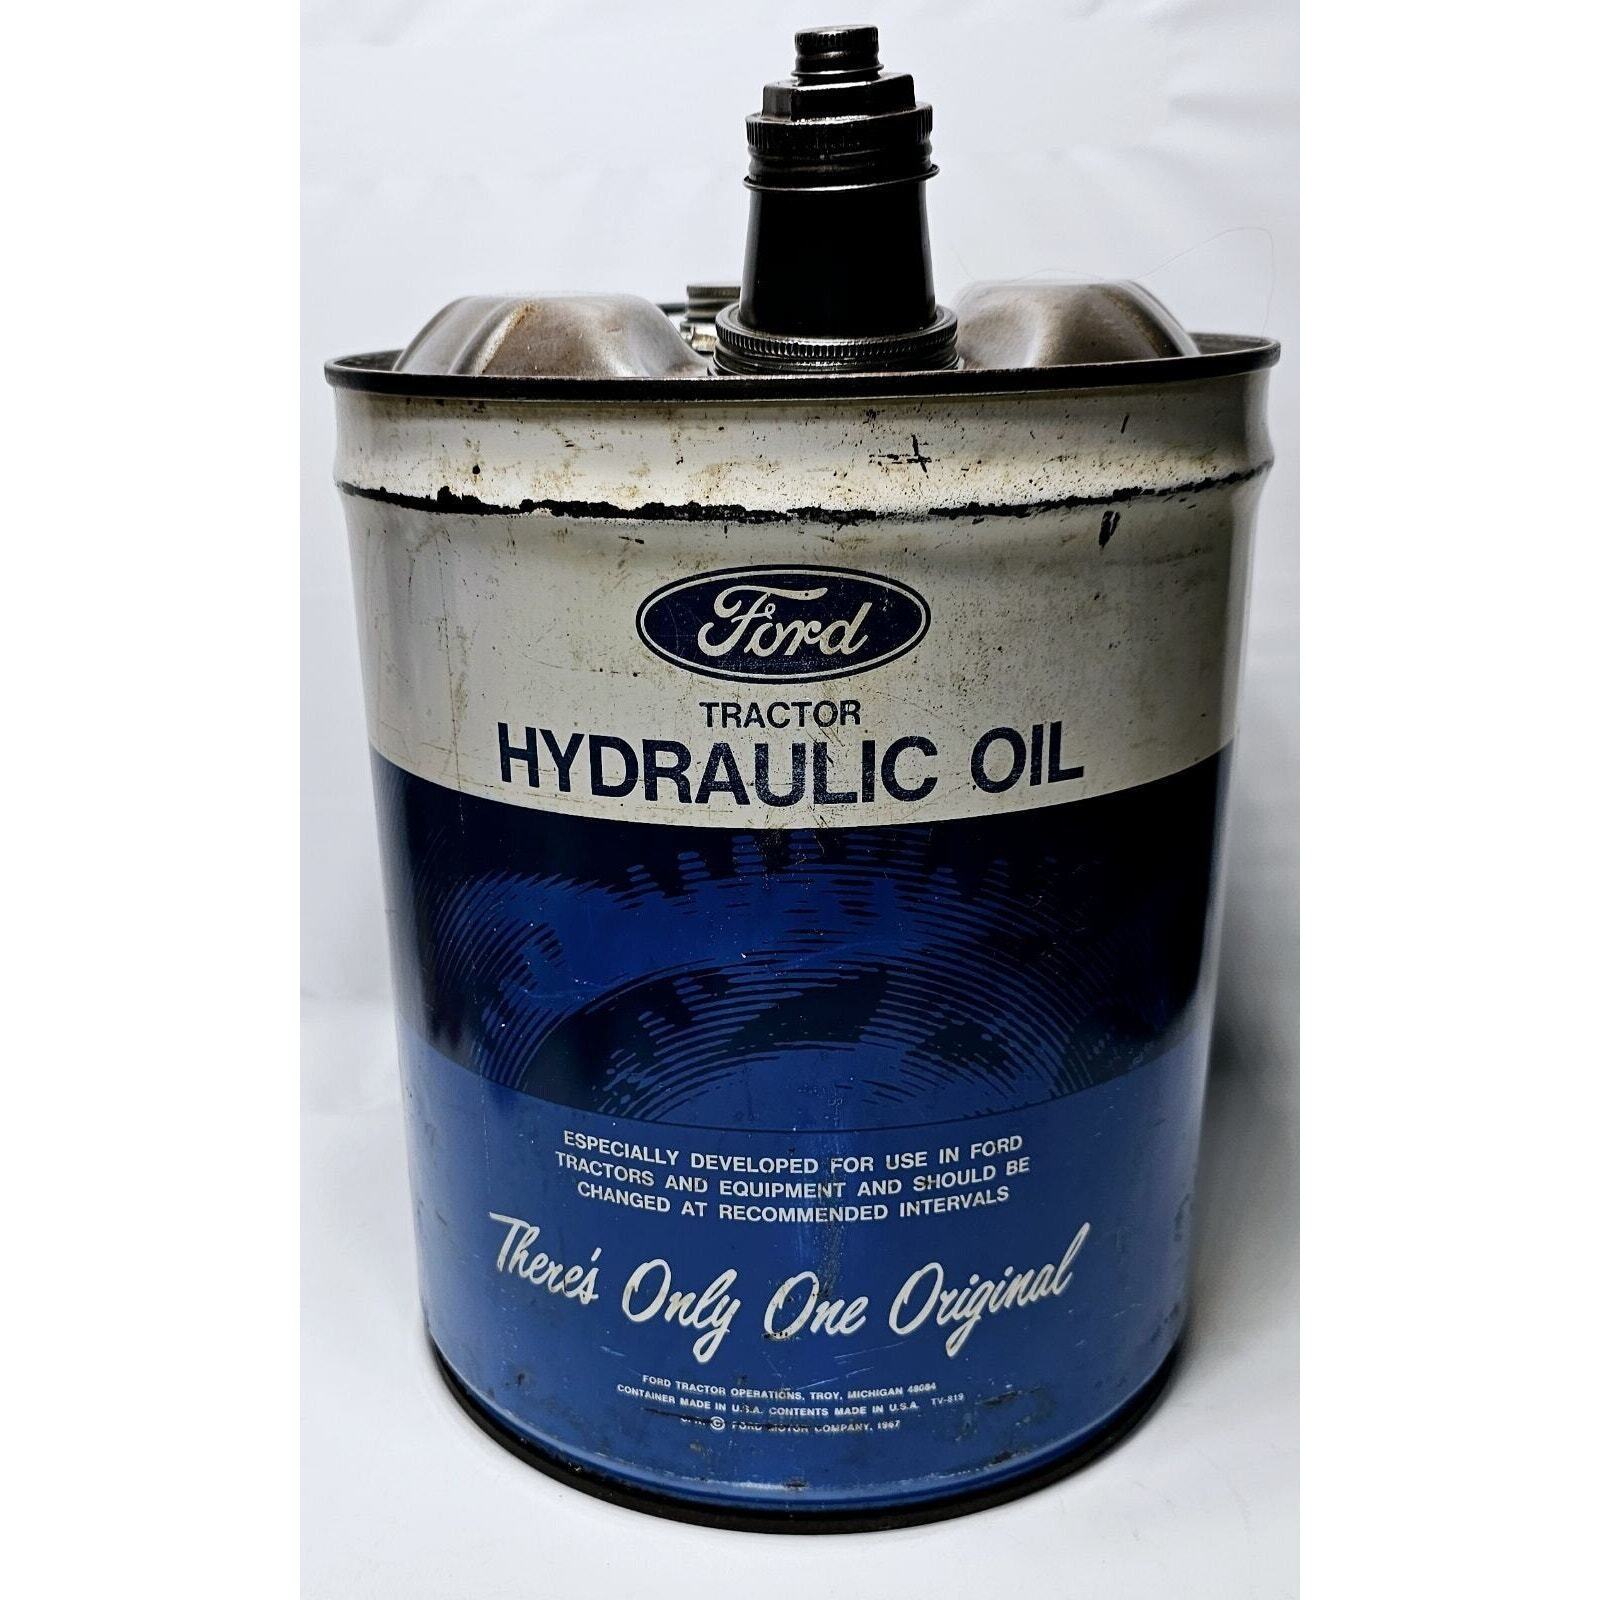 Vintage FORD Tractor Hydraulic Oil 5 Gallon Can EMPTY Made In USA Collectible